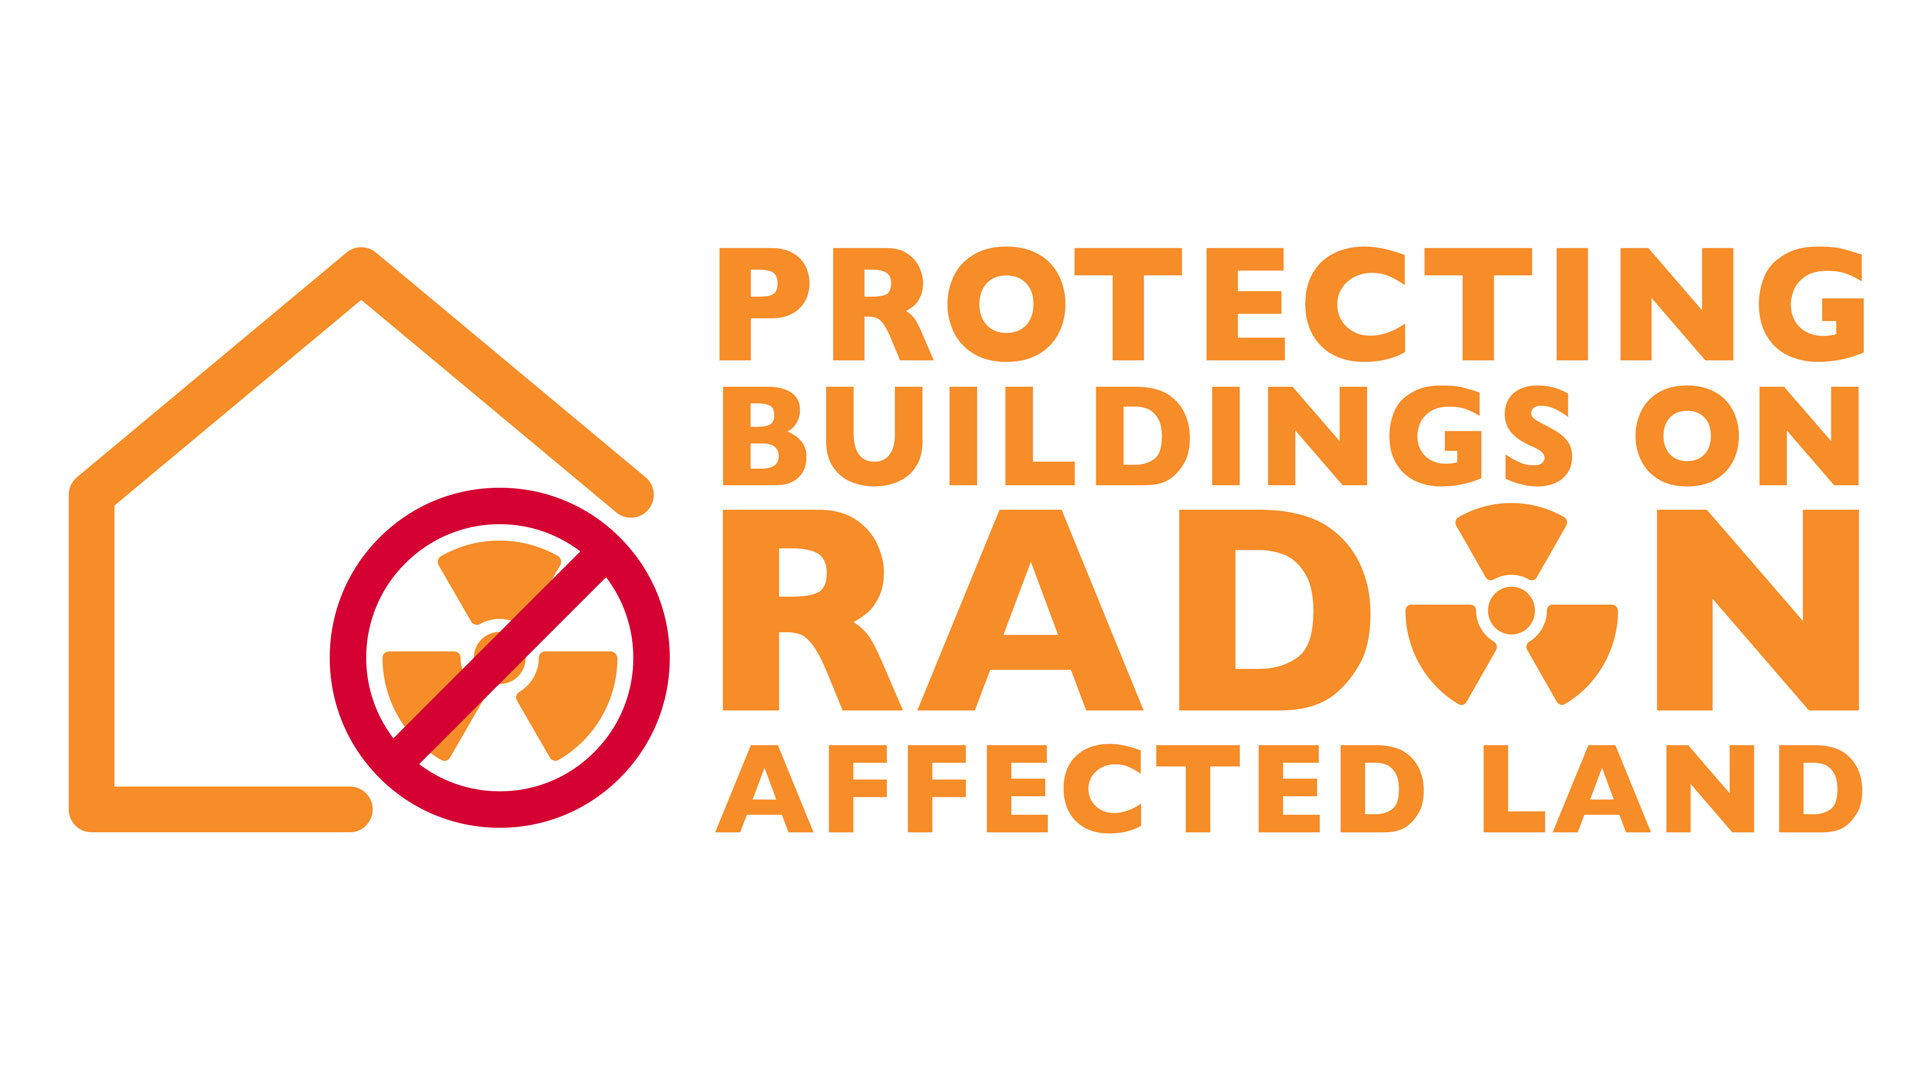 Welcome to our webinar, Protecting Buildings On Radon Affected Land. The webinar is followed by a Live Zoom Q A session with special guest Michael Hancock, Director of Glencoe Radon Gas Centre, and members of our Sales and Technical team.